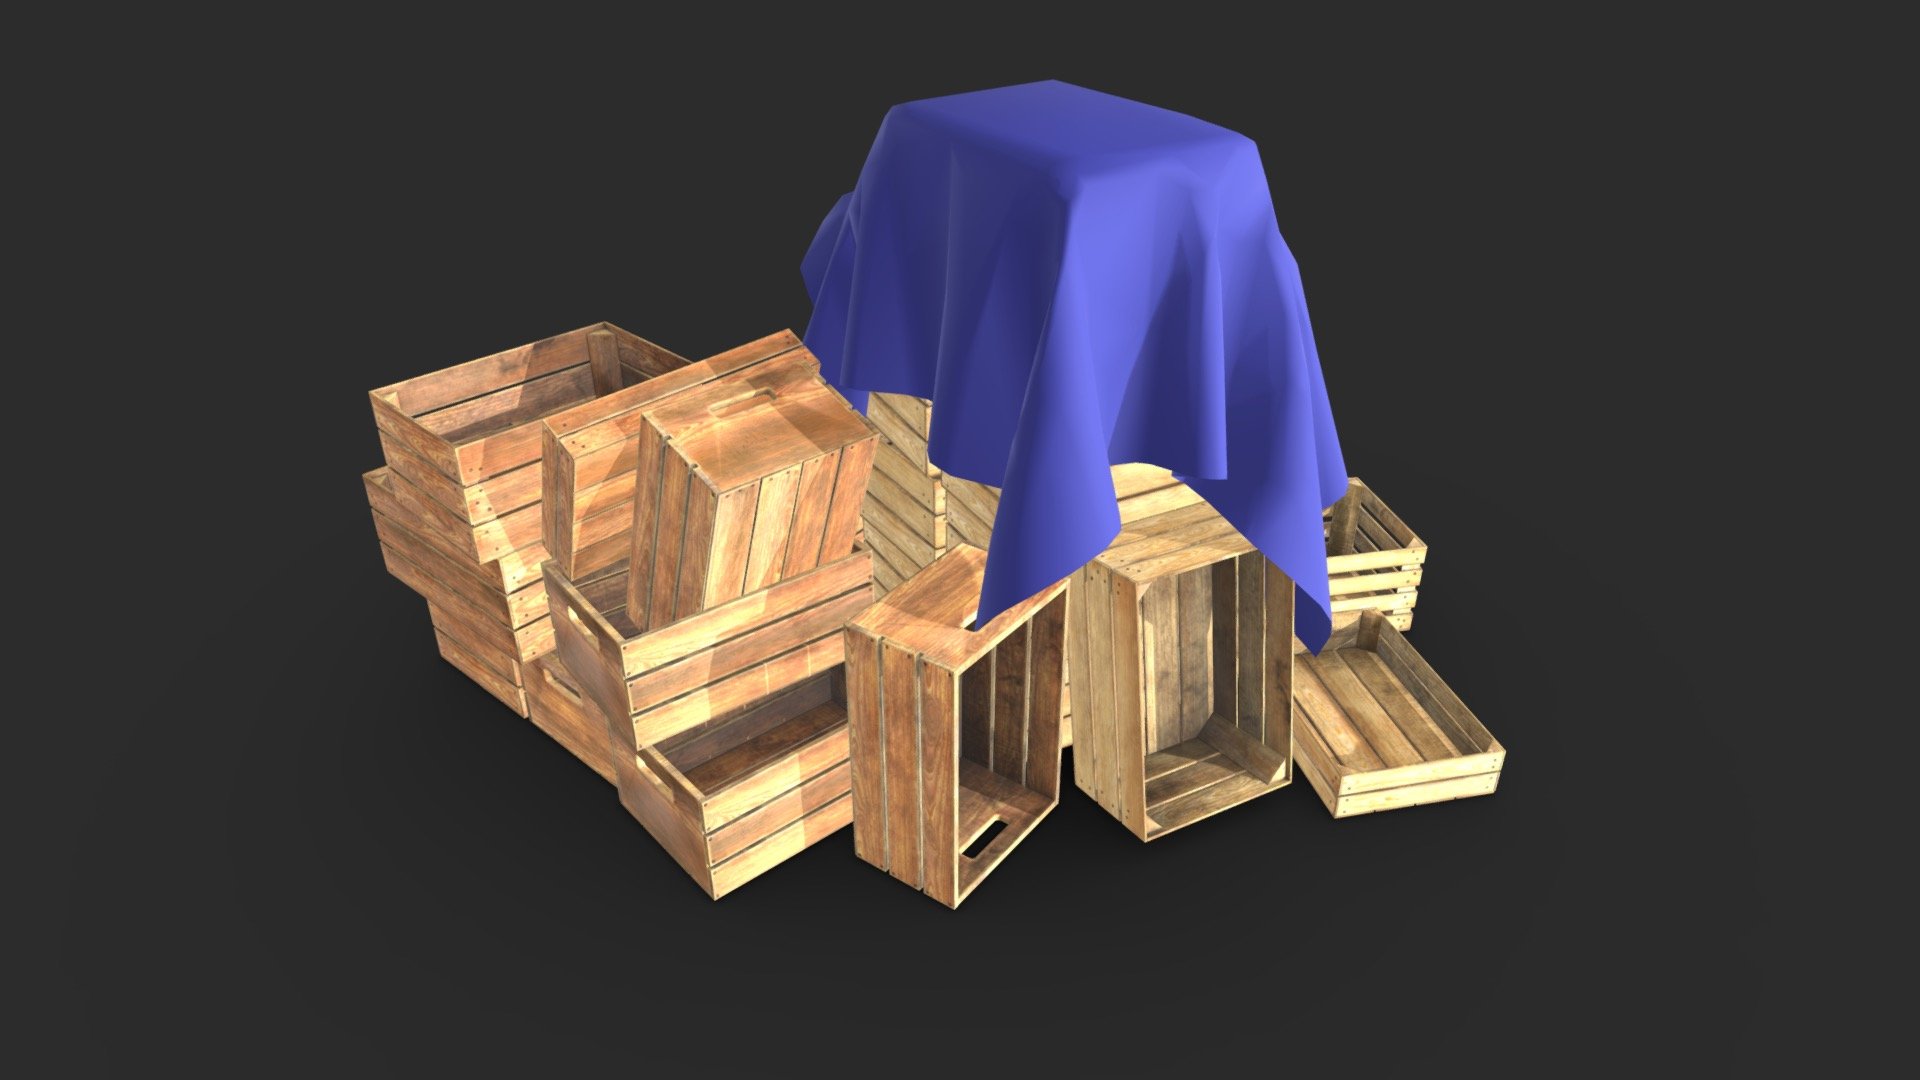 This wooden crates set includes 5 individual individual objects and 7 prefabs in 3 LODs. Also, the material is unique for all crates but includes 2 Base Color variants to get 2 color variations of the planks.

The asset is available in realistic style and can be used in any game (post-apo, first person shooter, GTA like, construction… ). All objects share a unique material for the best optimization for games.

Those AAA game assets of wooden crates will embellish you scene and add more details which can help the gameplay and the game-design or level-design.

Low-poly model &amp; Blender native 3.1

SPECIFICATIONS




Objects : 14

Polygons : 10176

Render Engine : Eevee

GAME SPECS




LODs : Yes (inside FBX for Unity &amp; Unreal)

Numbers of LODs : 3

Collider : No

TEXTURES




Materials in scene : 2 (1 for crates + 1 for tarps)

Textures sizes : 4K

Textures types : Base Color, Metallic, Roughness, Normal (DirectX &amp; OpenGL), Heigh &amp; AO (also Unity &amp; Unreal ARM workflow maps)

Textures format : PNG
 - Wooden Crates Set - Buy Royalty Free 3D model by KangaroOz 3D (@KangaroOz-3D) 3d model